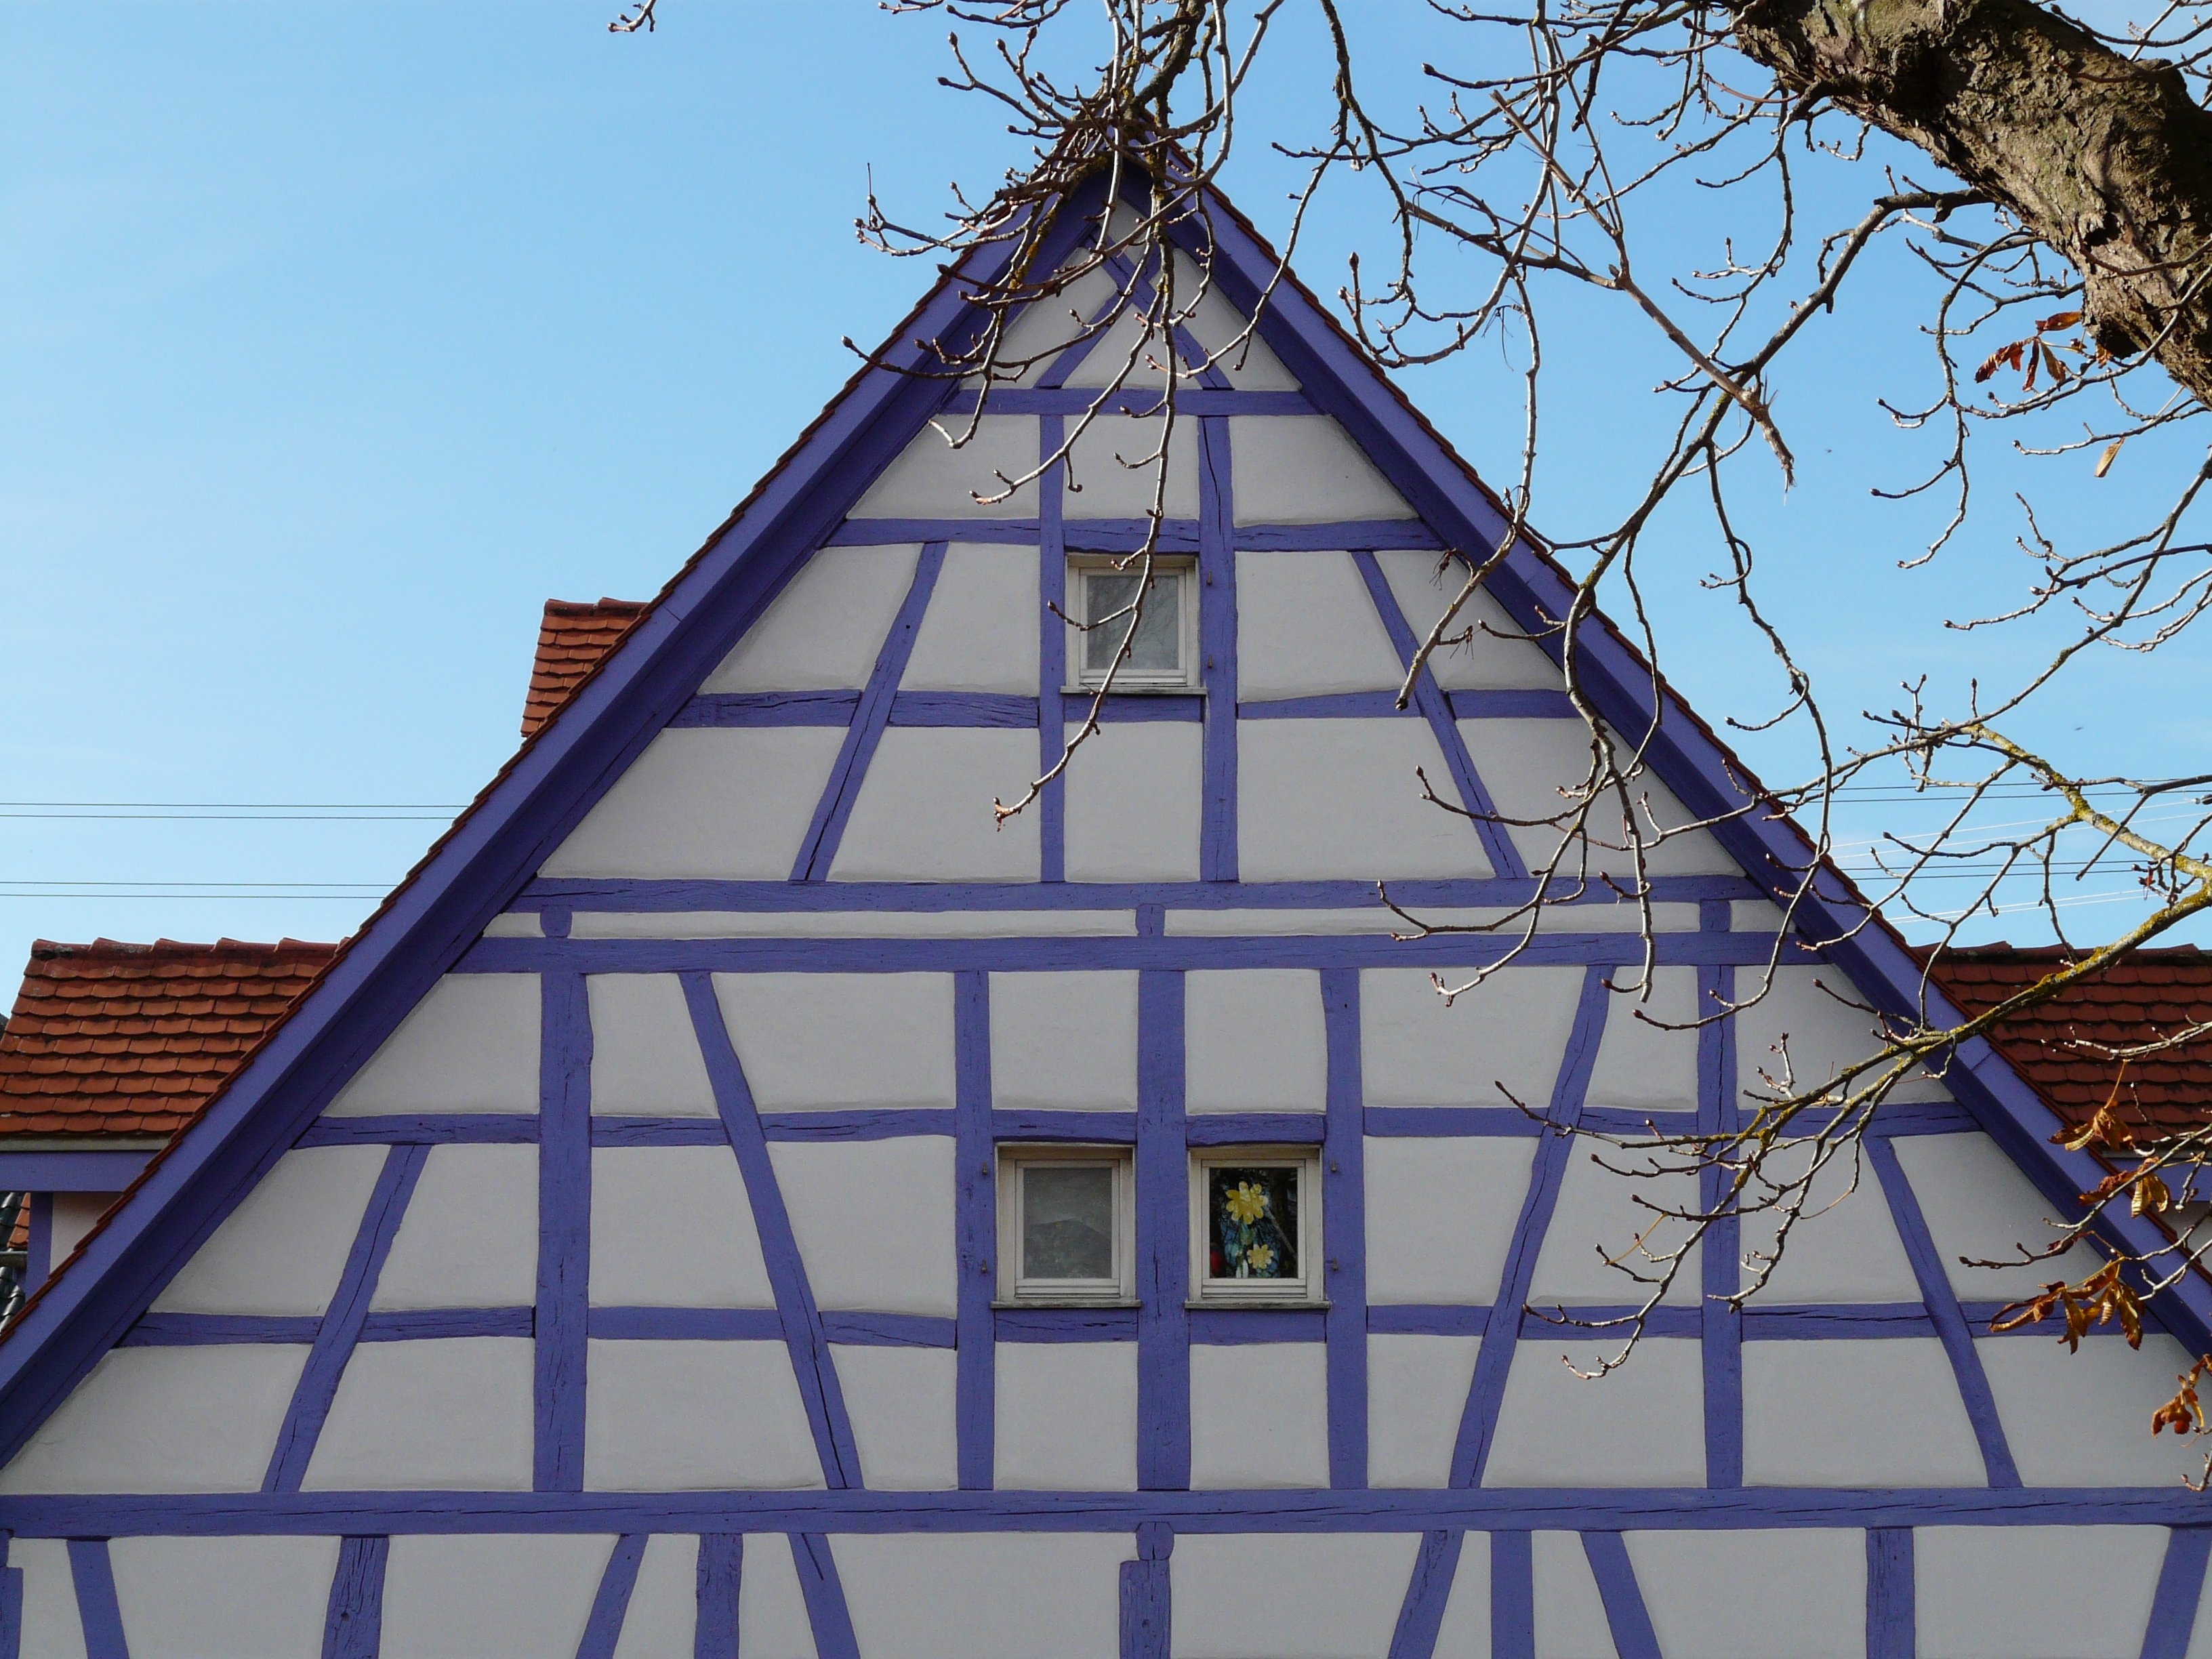 white and purple wooden house